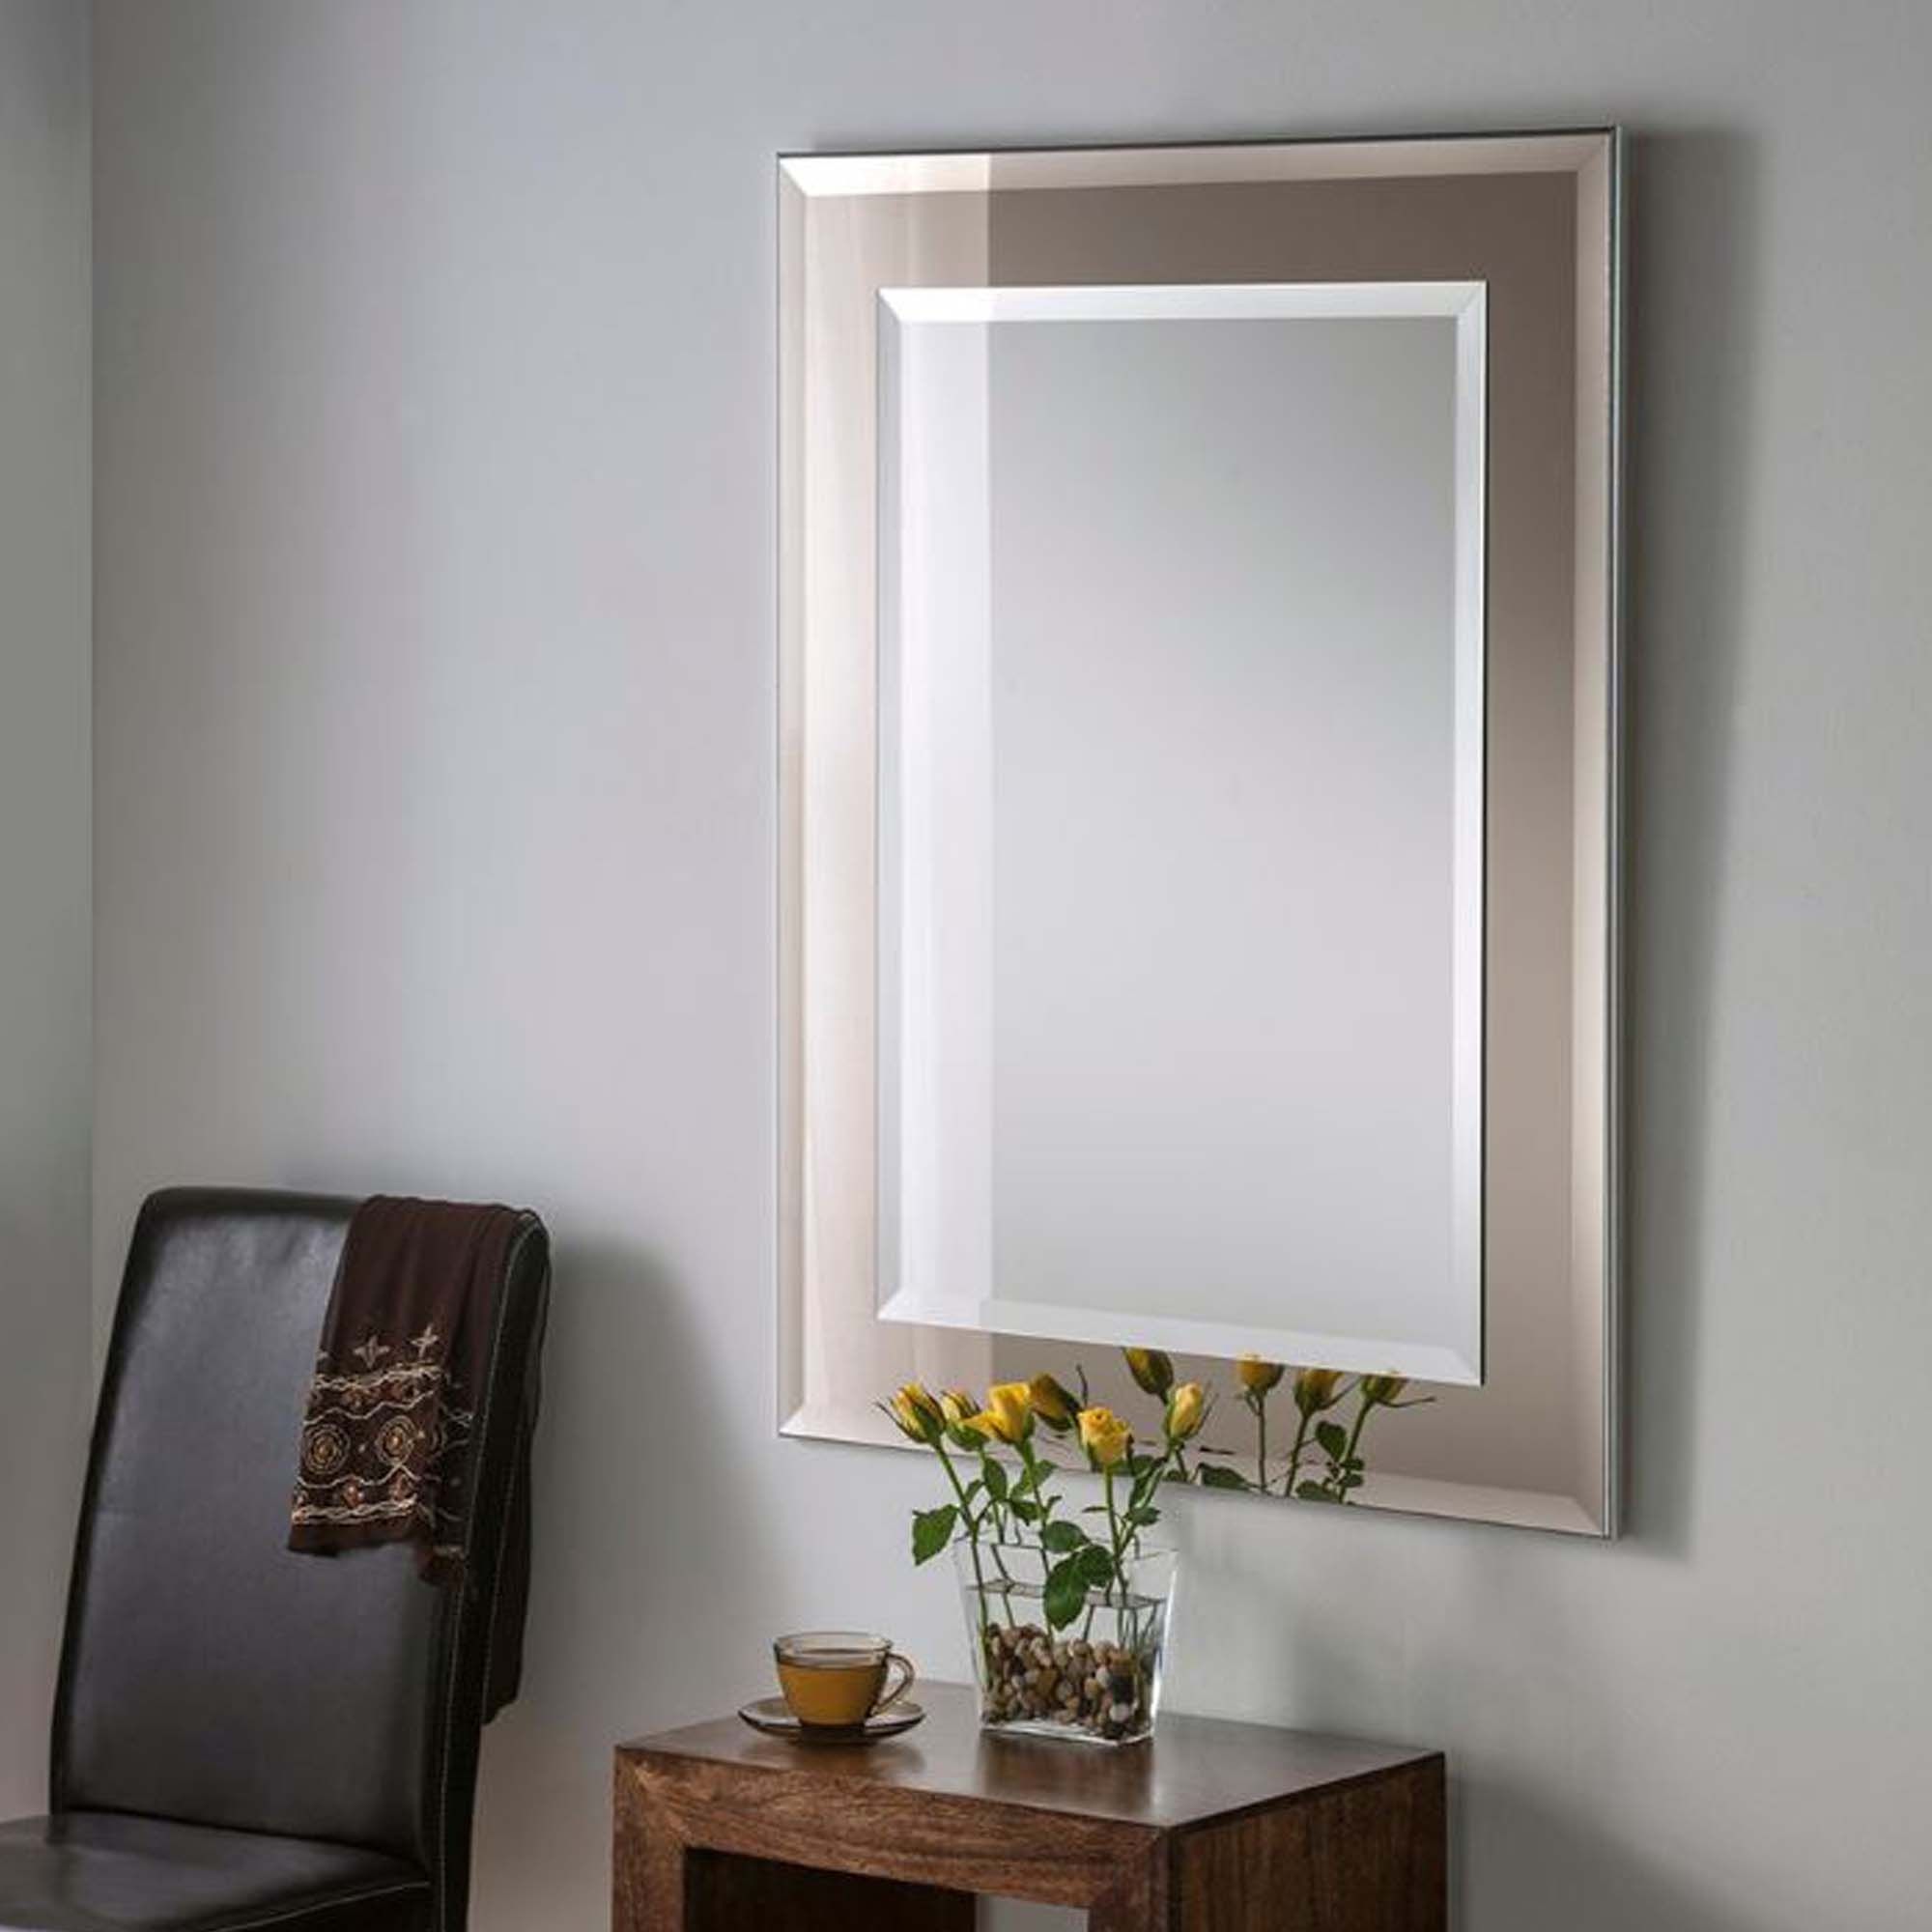 Contemporary Wall Mirror Bronze Rectangular Frame | Wall Mirrors With Regard To Black Beaded Rectangular Wall Mirrors (View 10 of 15)